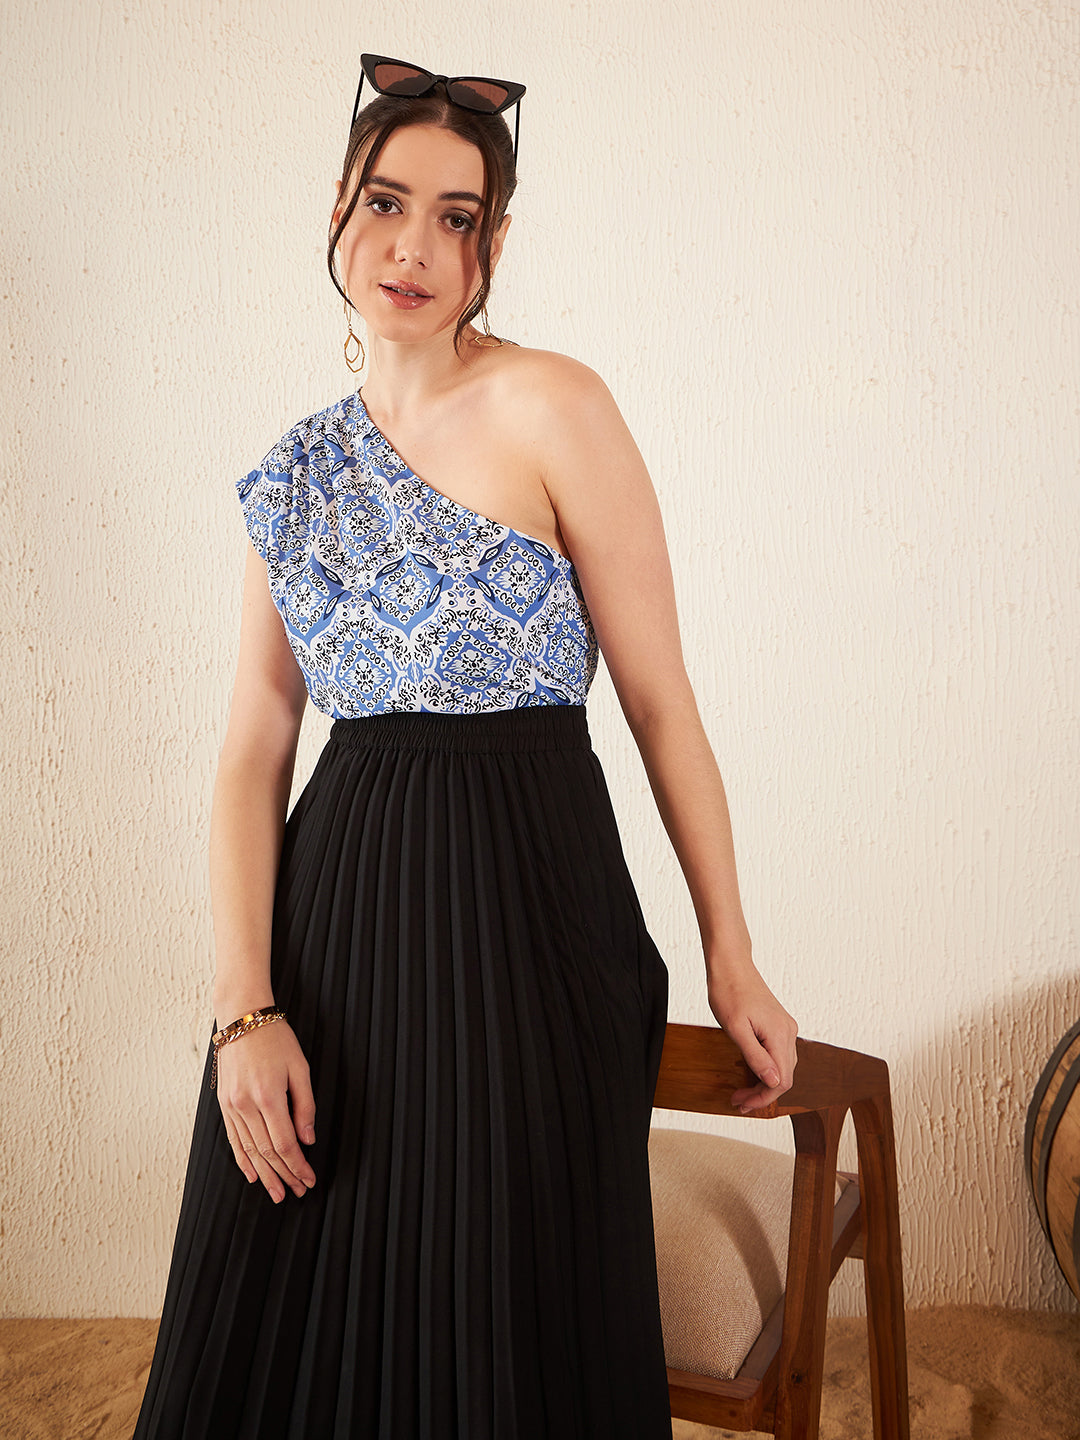 Women White and Blue Ethnic Motifs Printed One Shoulder Top